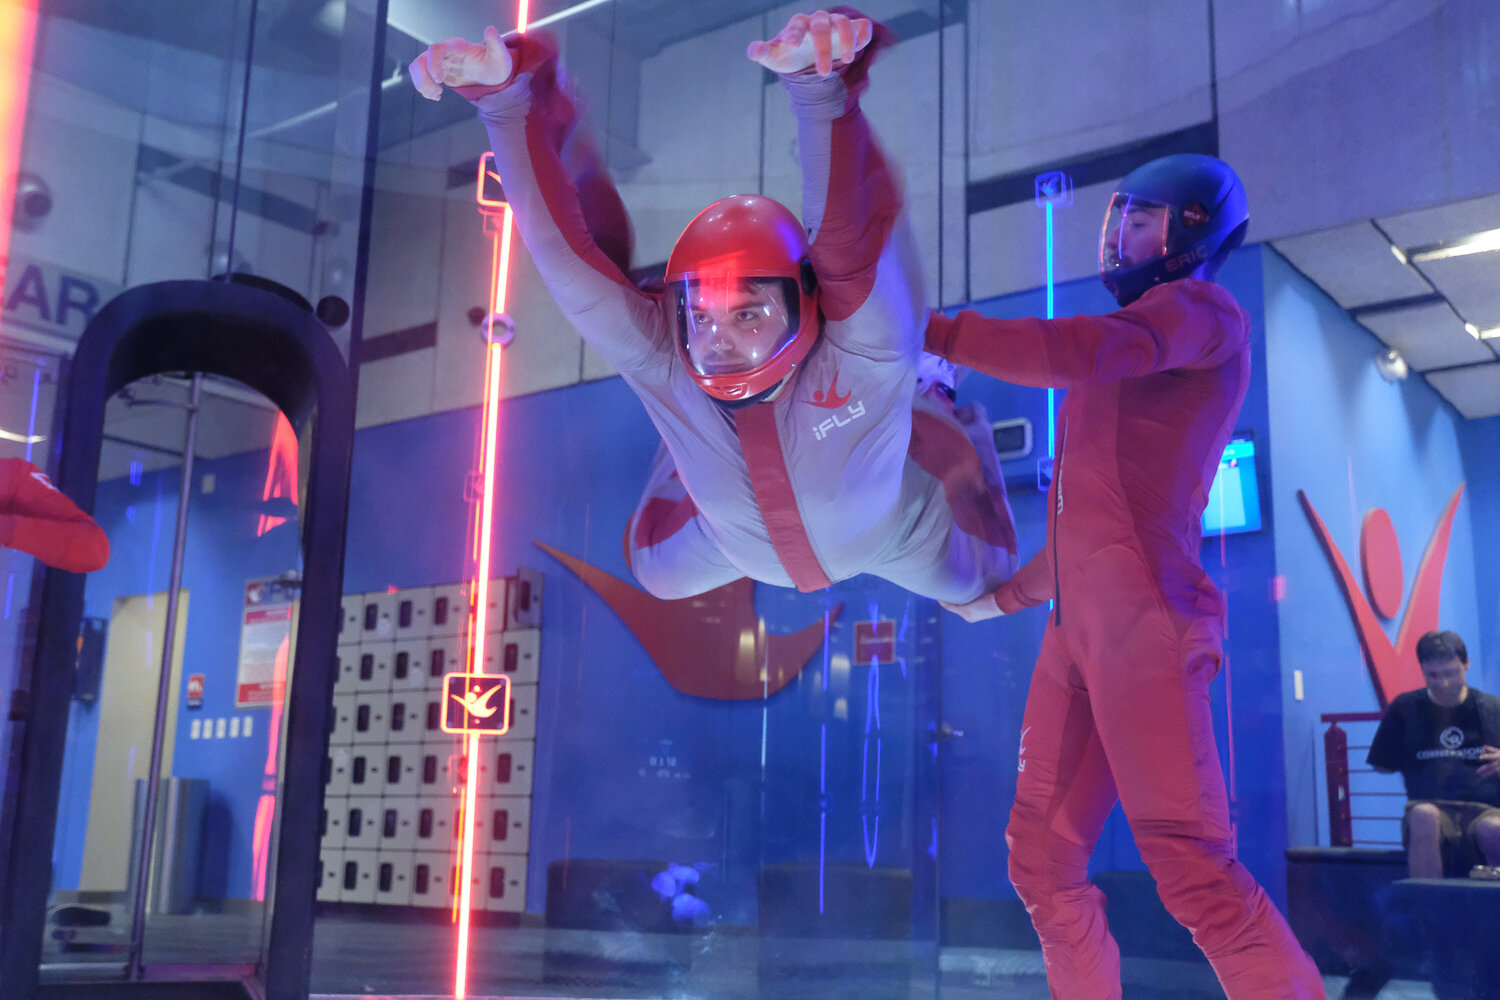 iFly event